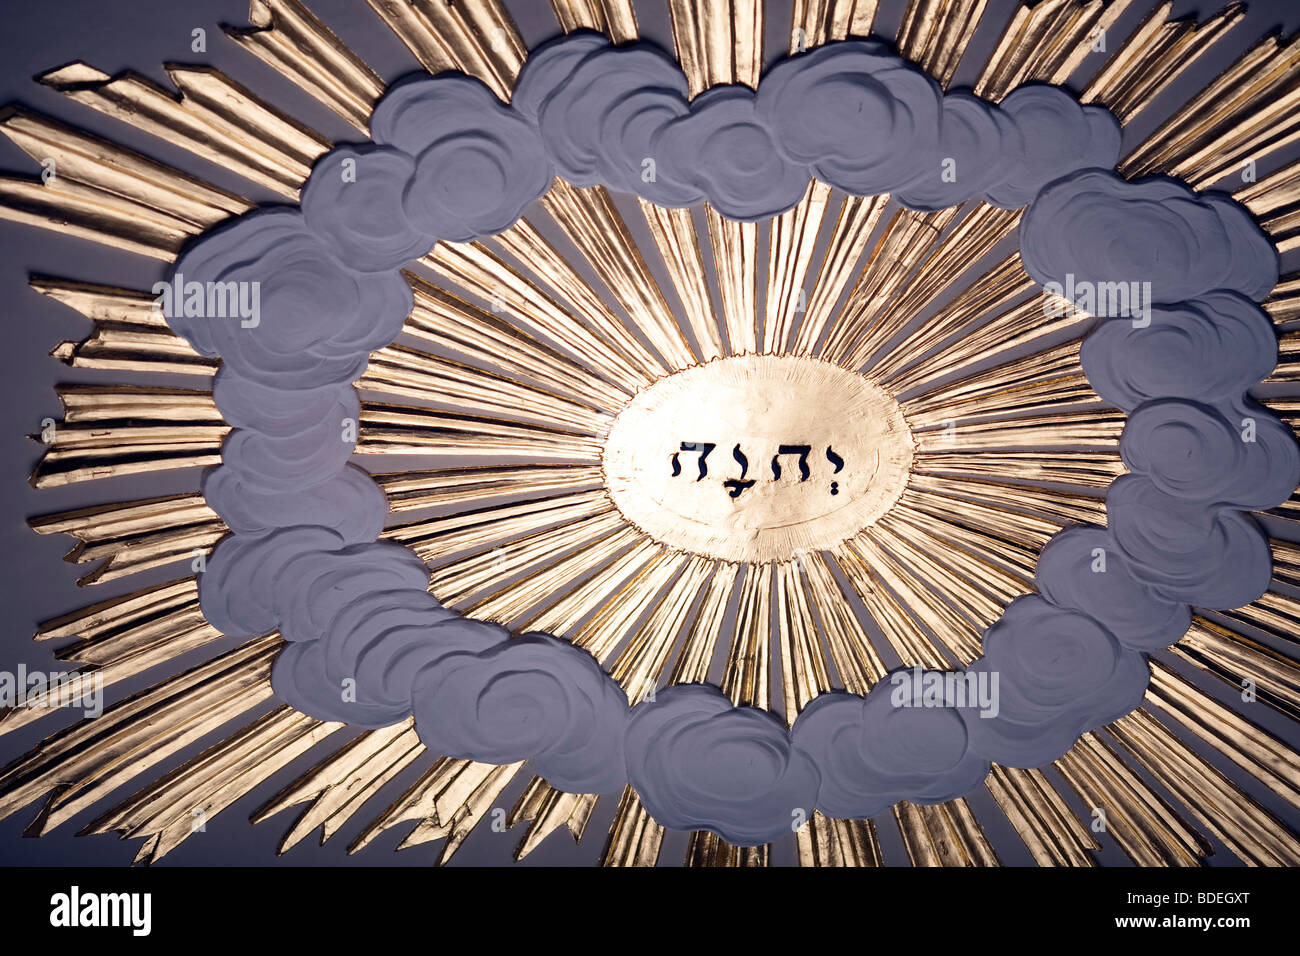 The Hebrew Word Meaning God On The Ceiling Of Saint Martin